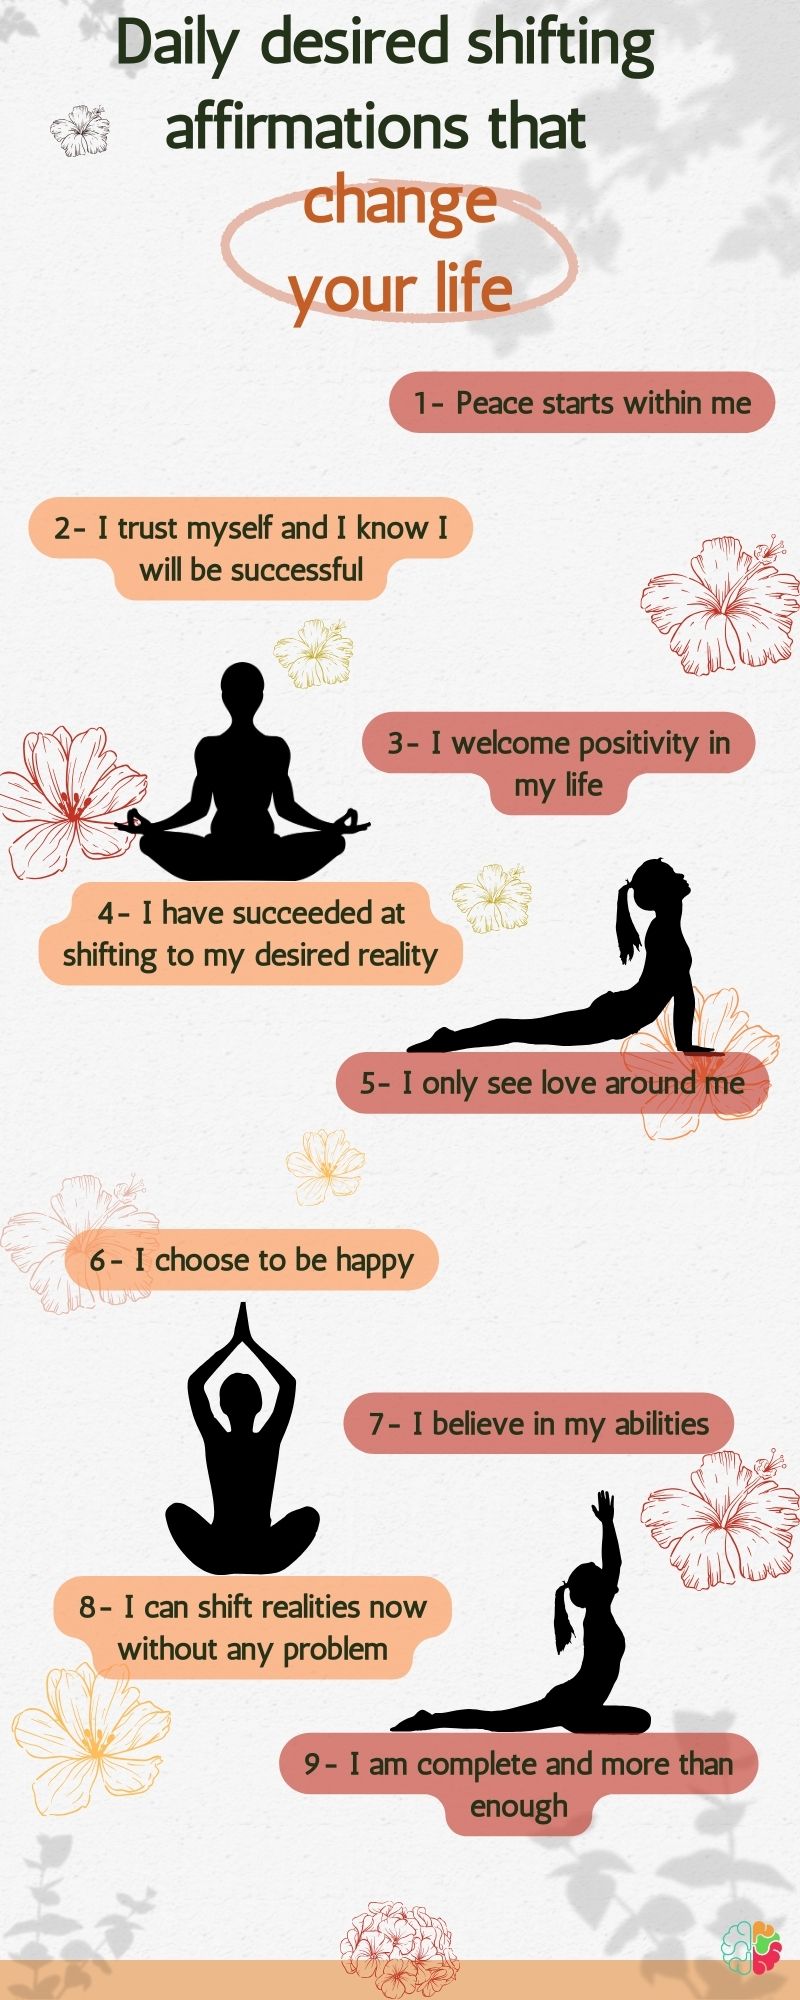 infographic about Daily desired shifting affirmations that change your life